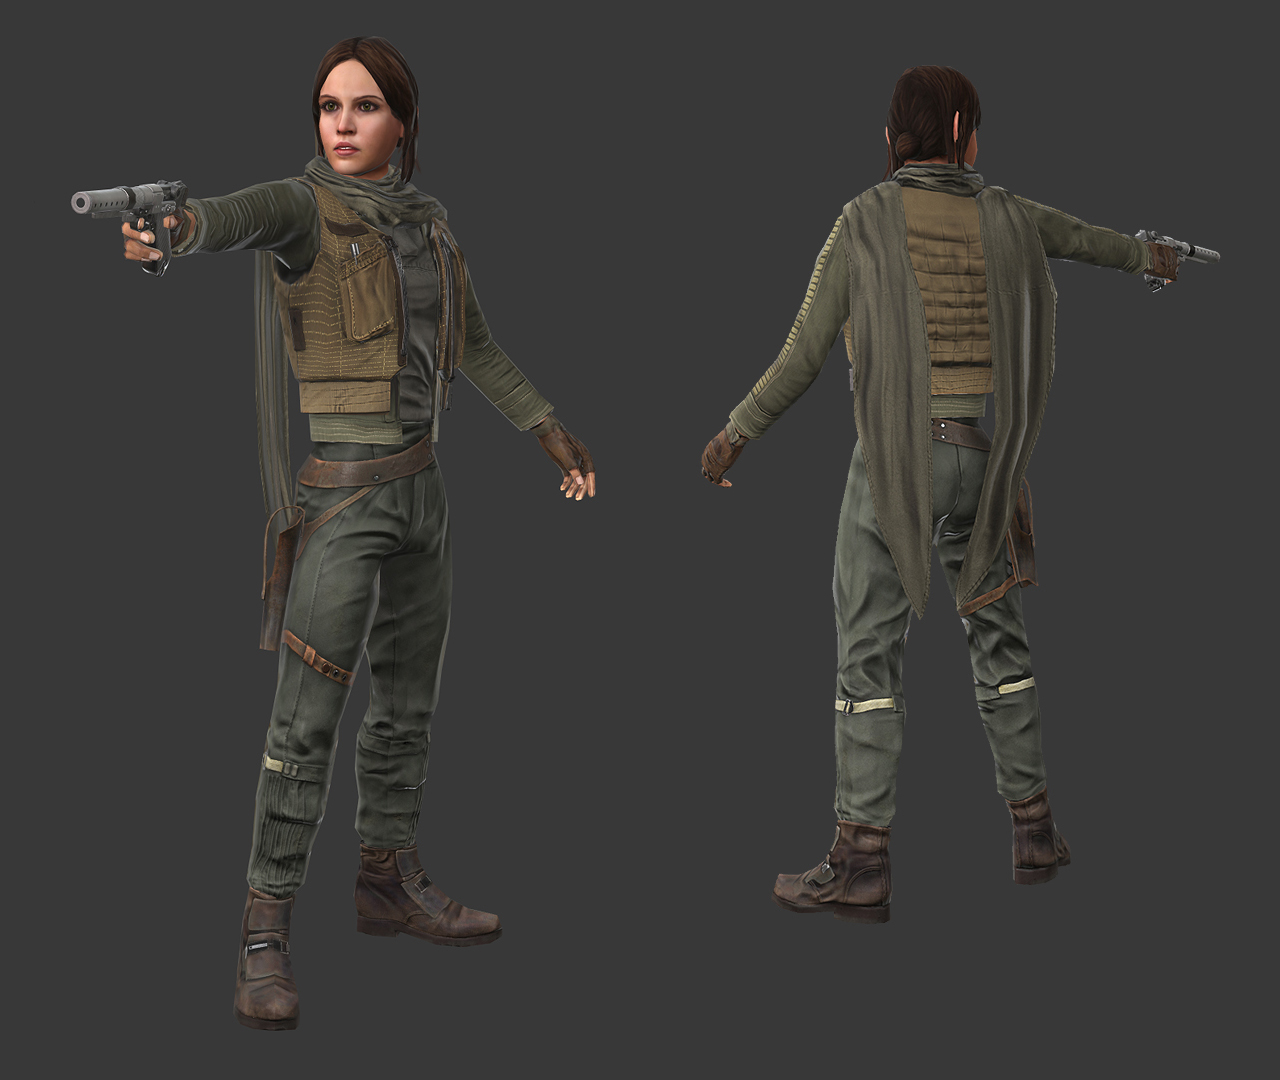 More information about "Jyn Erso"